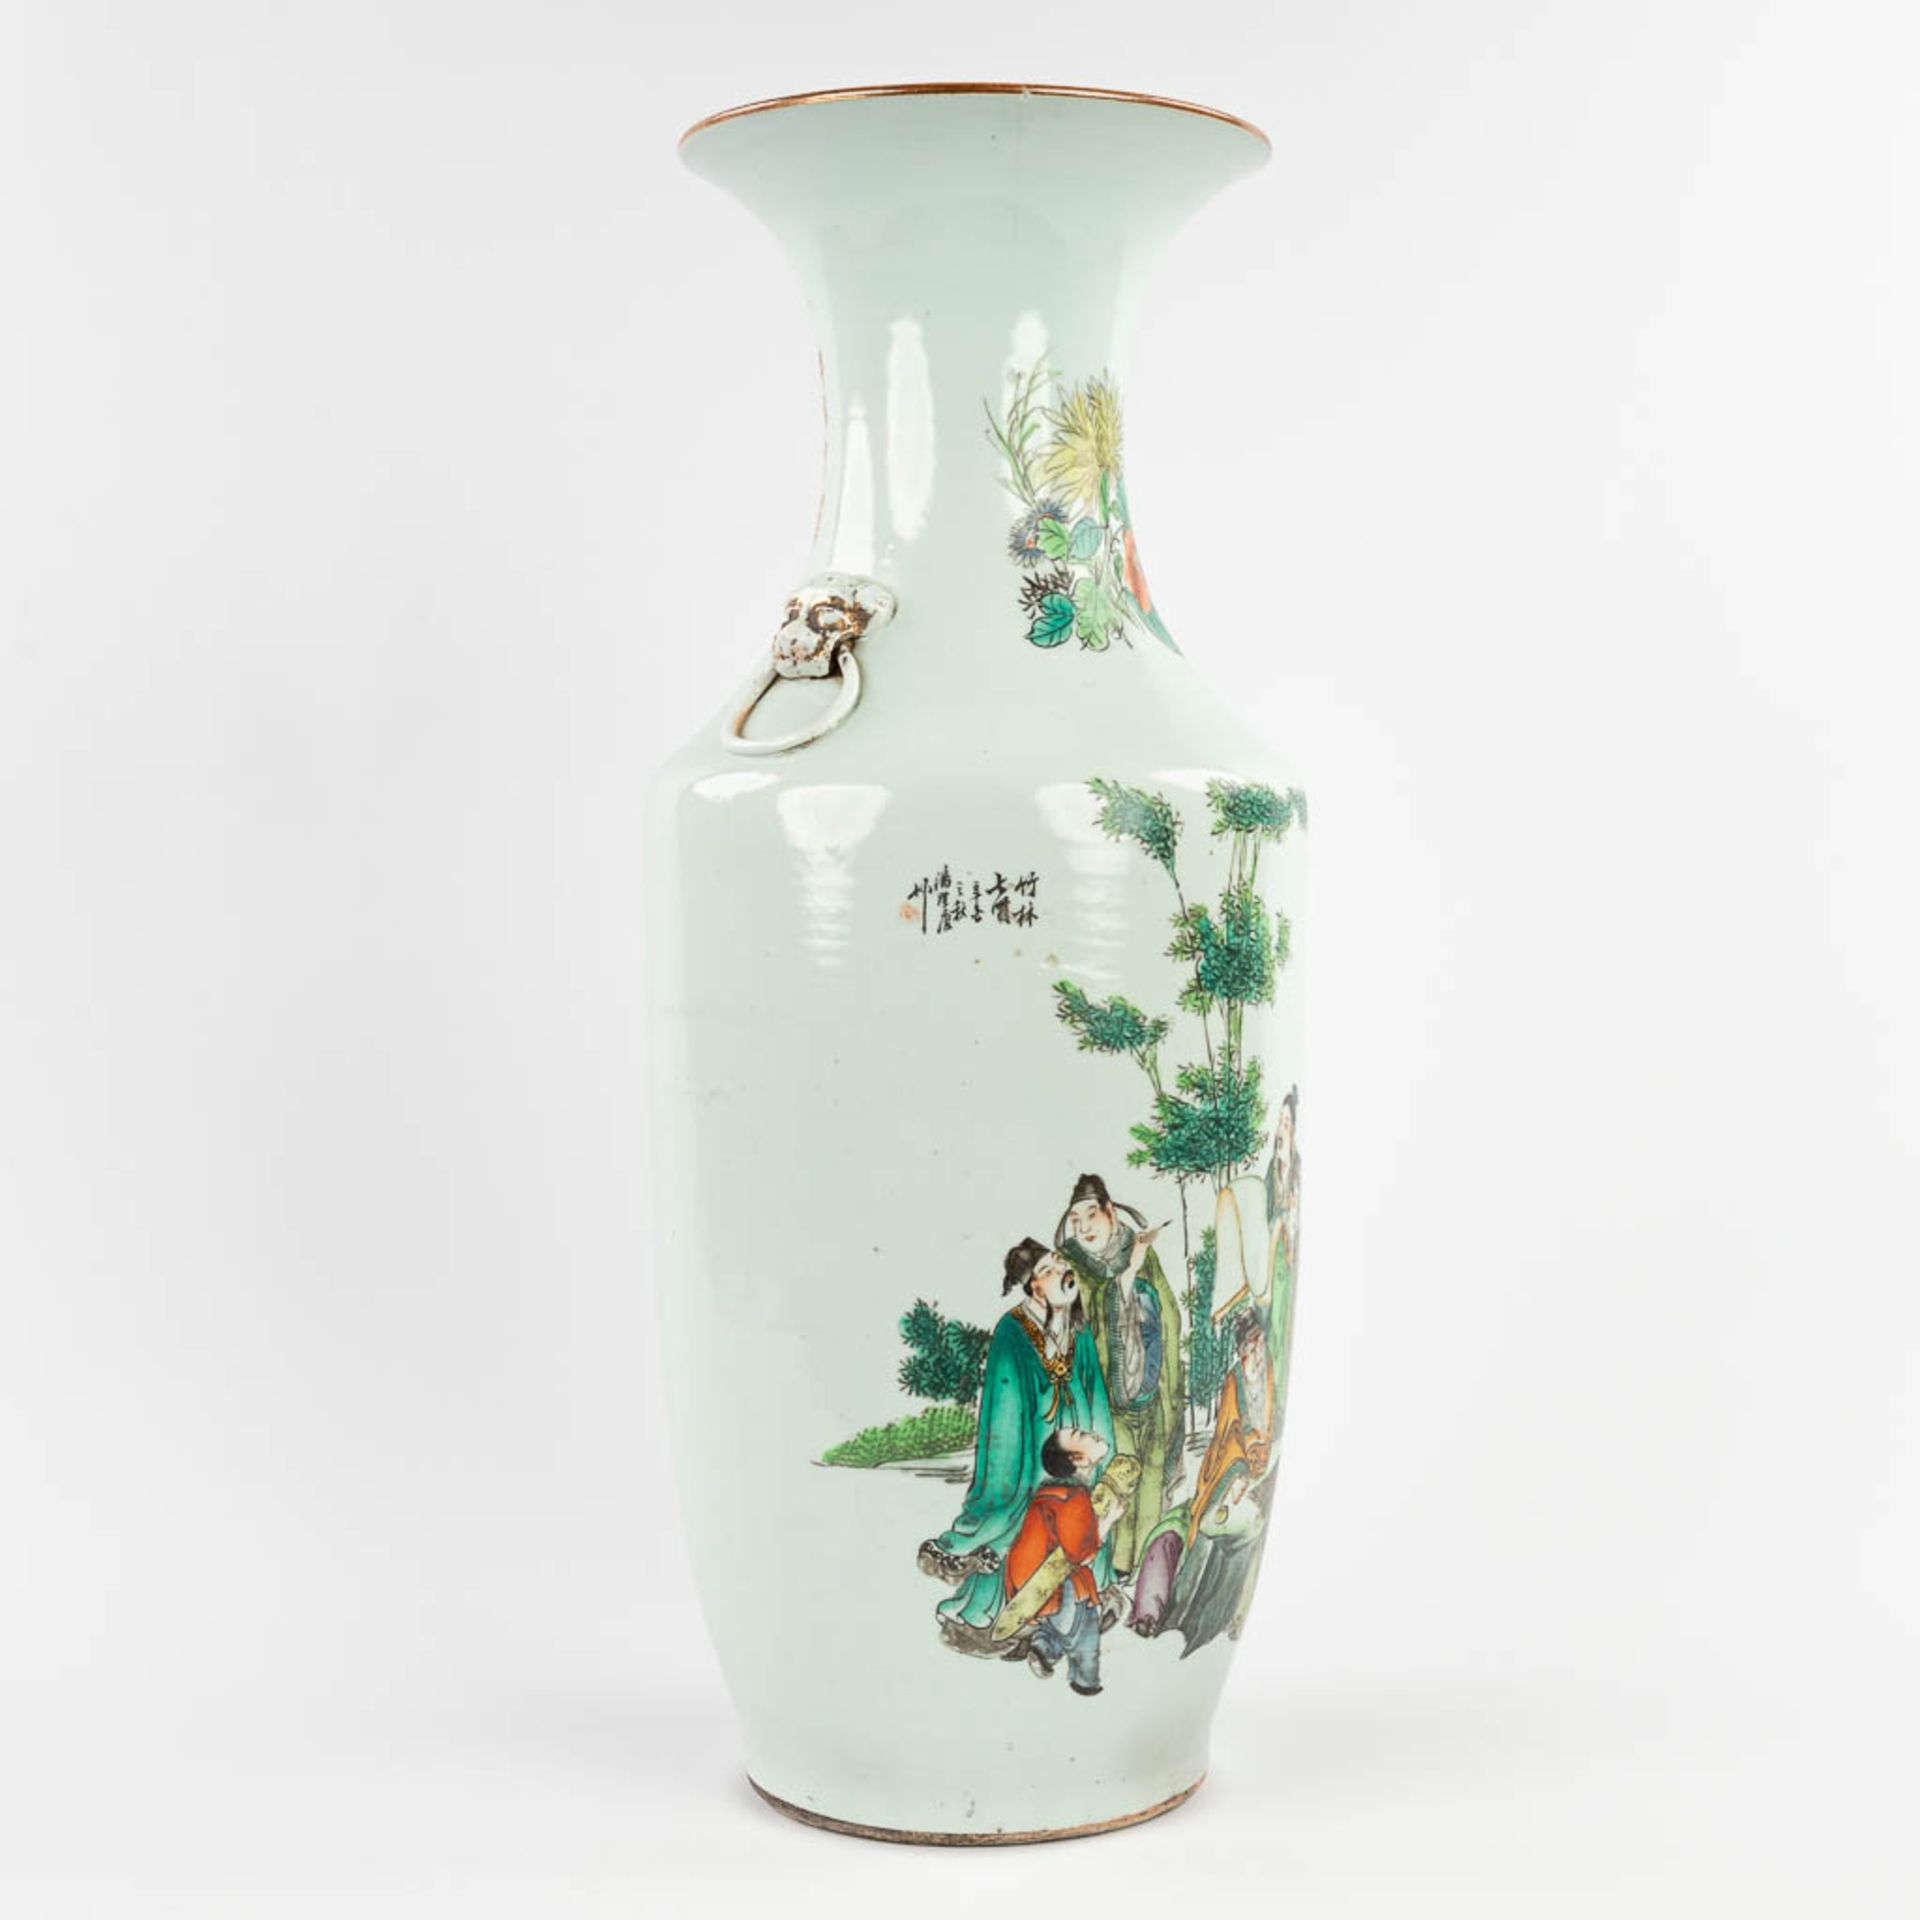 A Chinese vase, decorated with wise men in a garden. 19th/20th C. (H:58 x D:23 cm) - Bild 3 aus 16